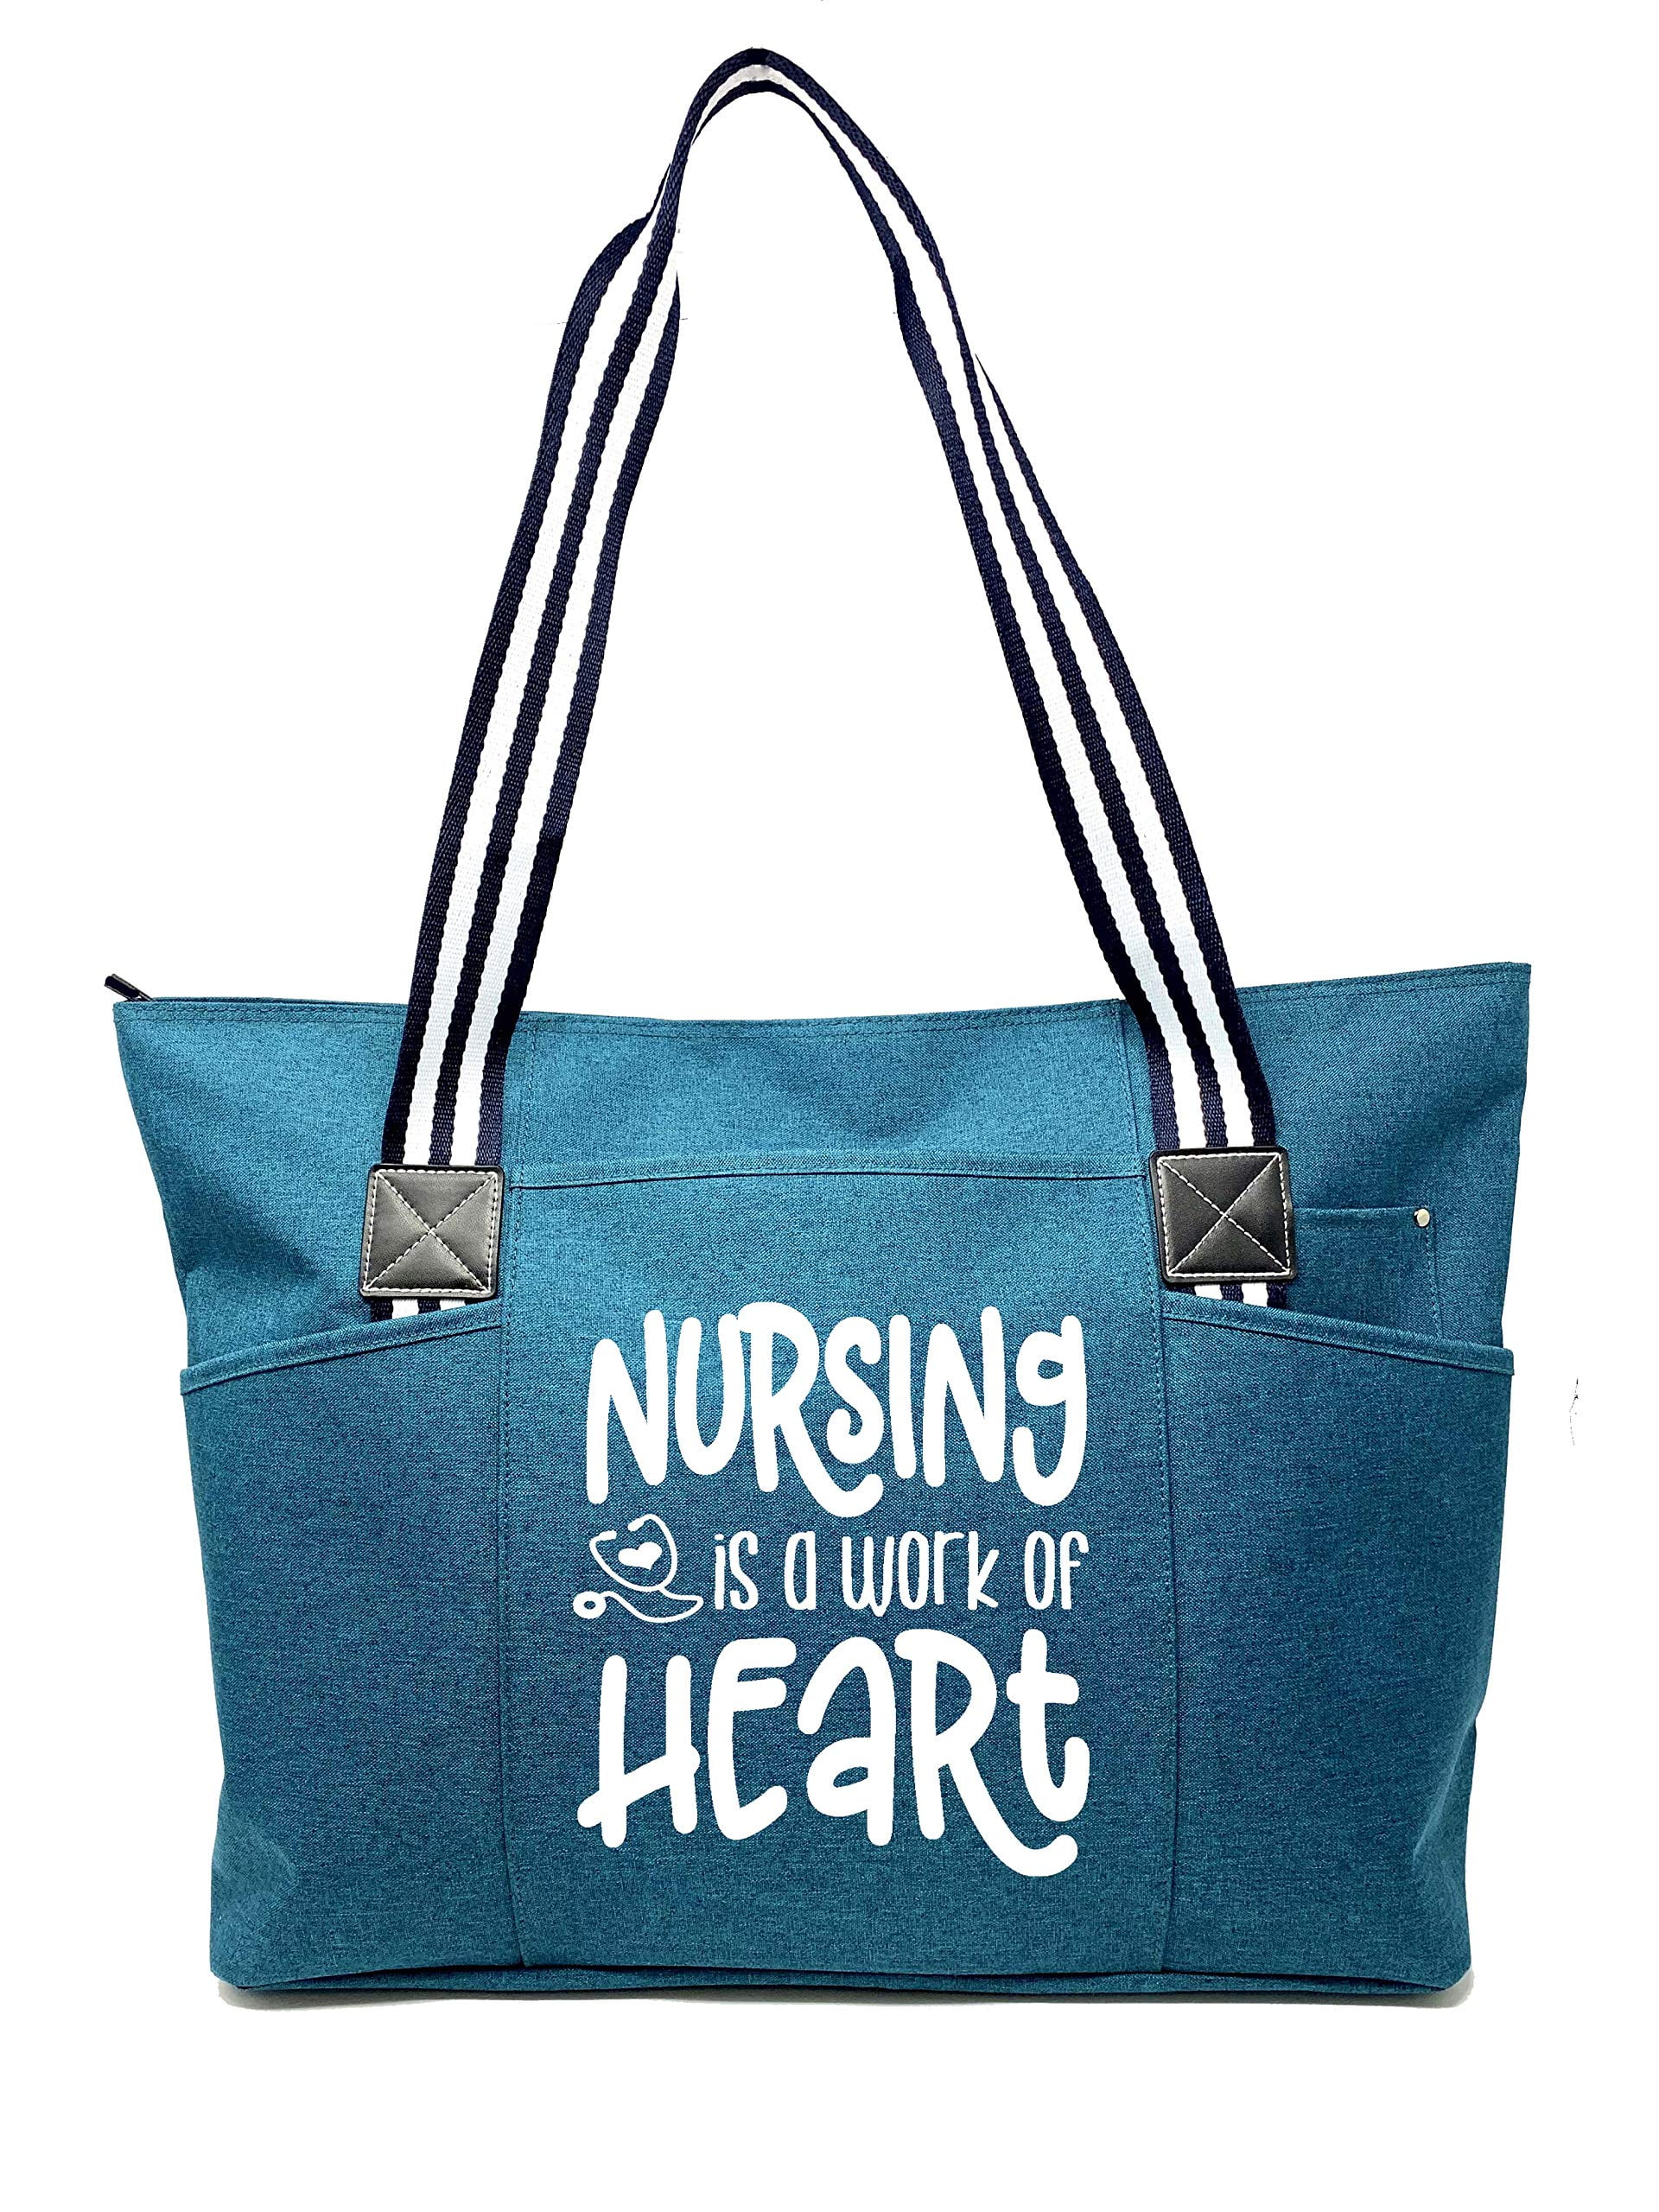 Nurse Bags and Totes for Work - Nursing Bags for Nurses - Clinical Bag for  Nursing Students, CNA, RN Tote, Gifts for Women